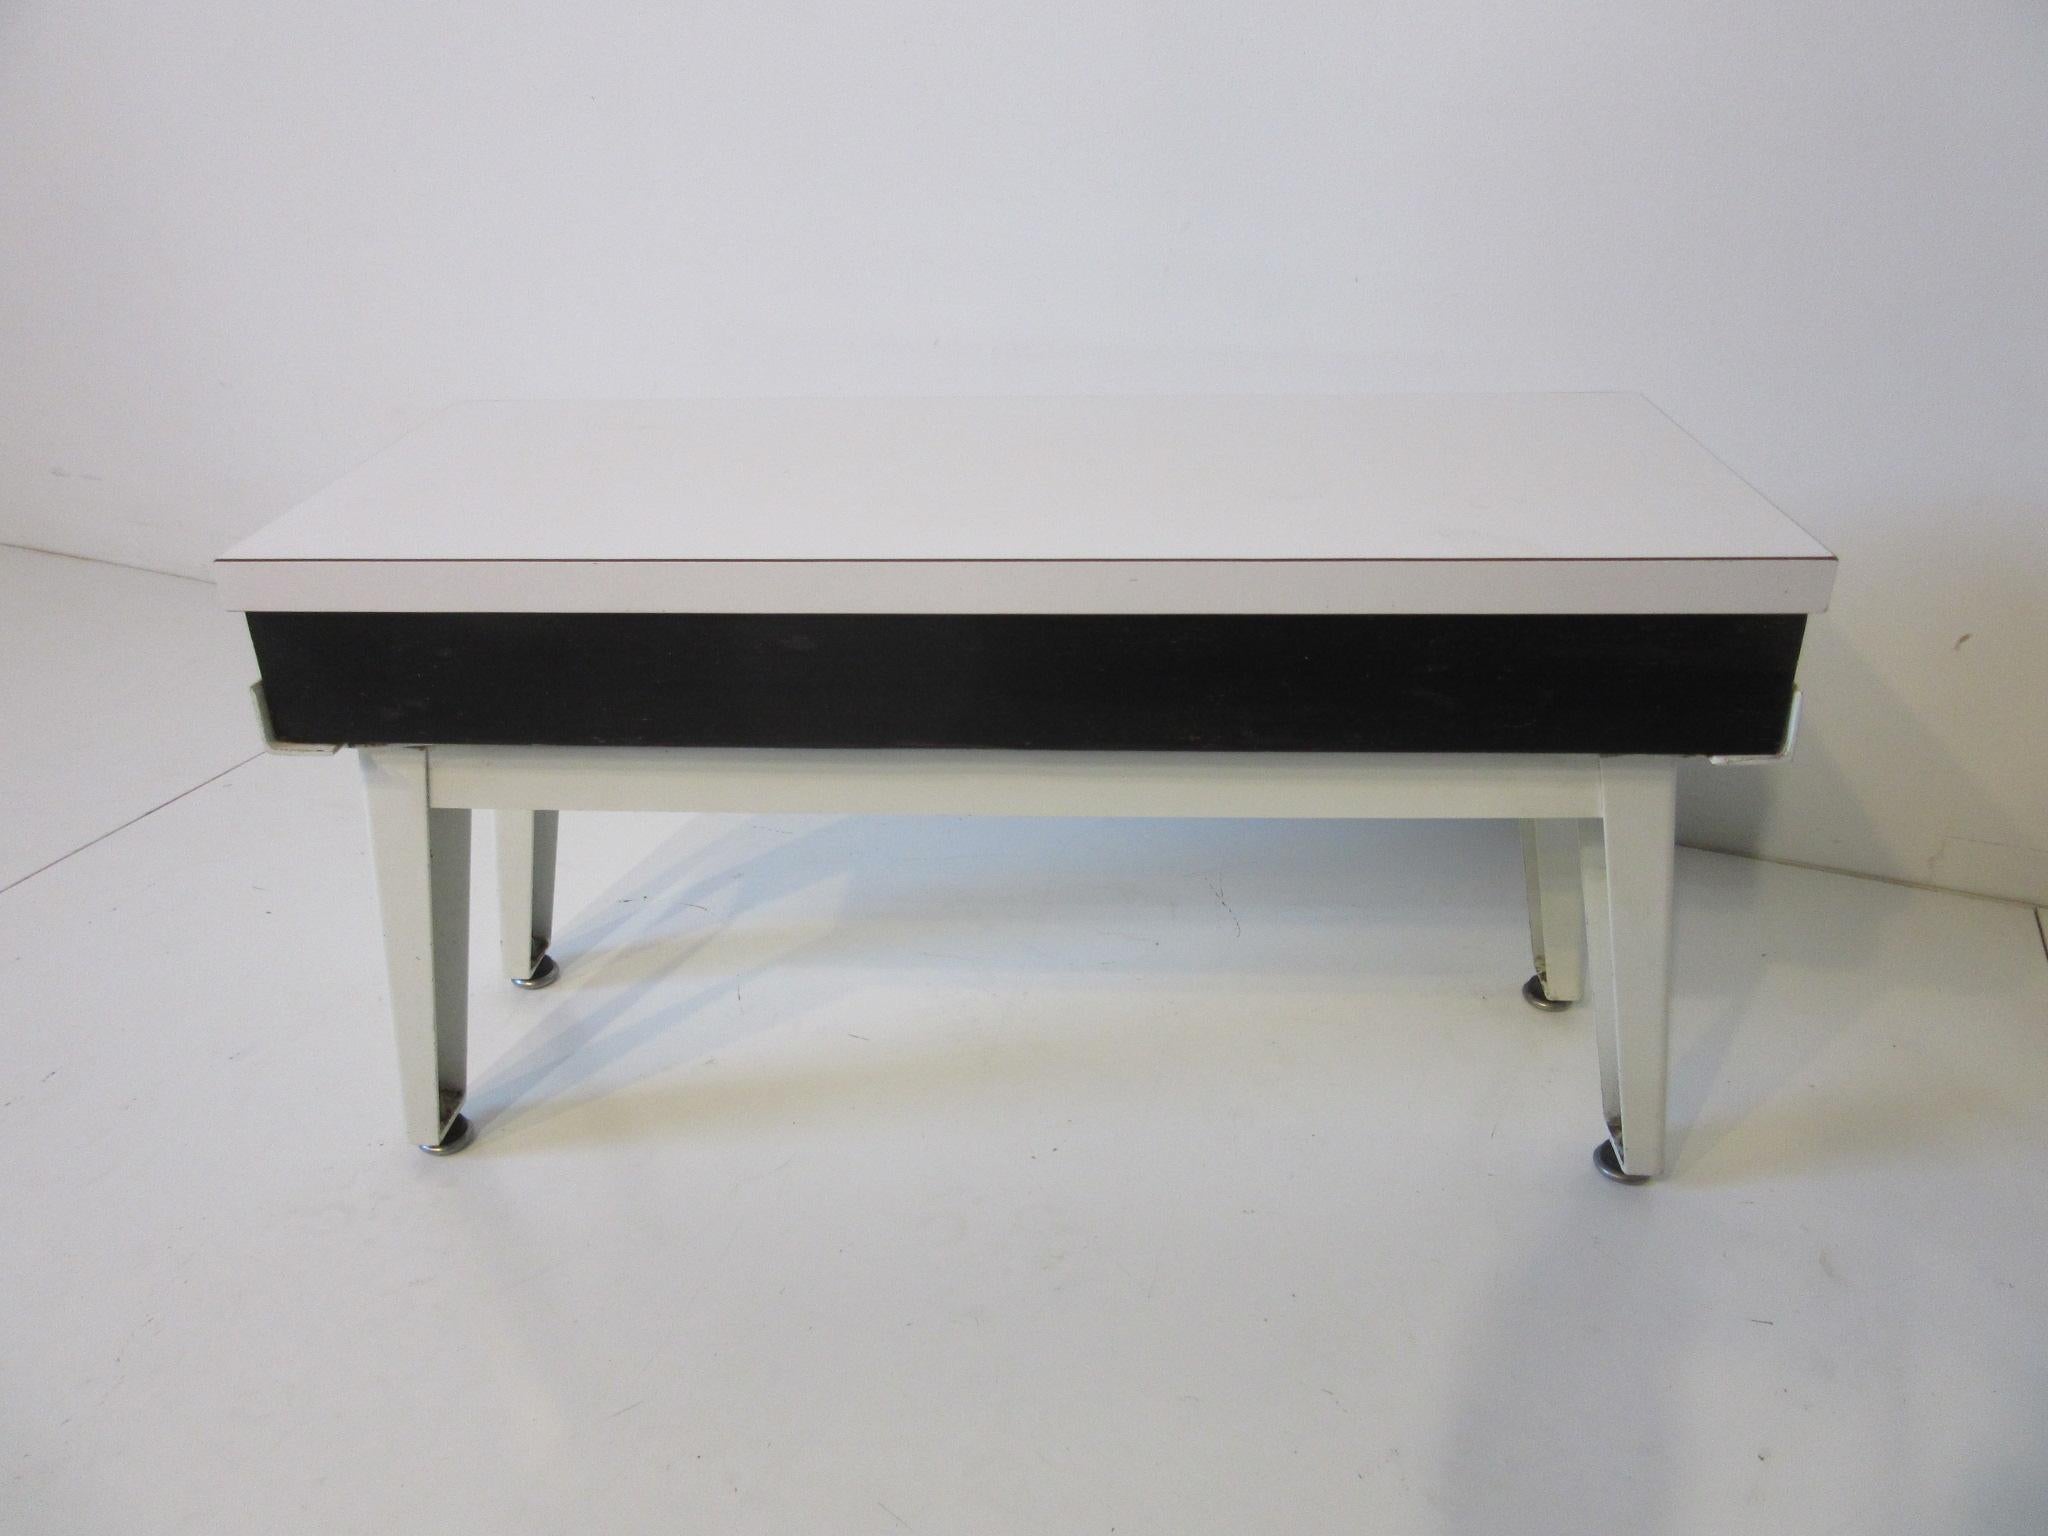 A very rare special order steel frame drink side table, satin white metal frame with wood and laminate top and screw in foot pads. This is a well made factory piece which would be great to have to complete your steel frame series collection,